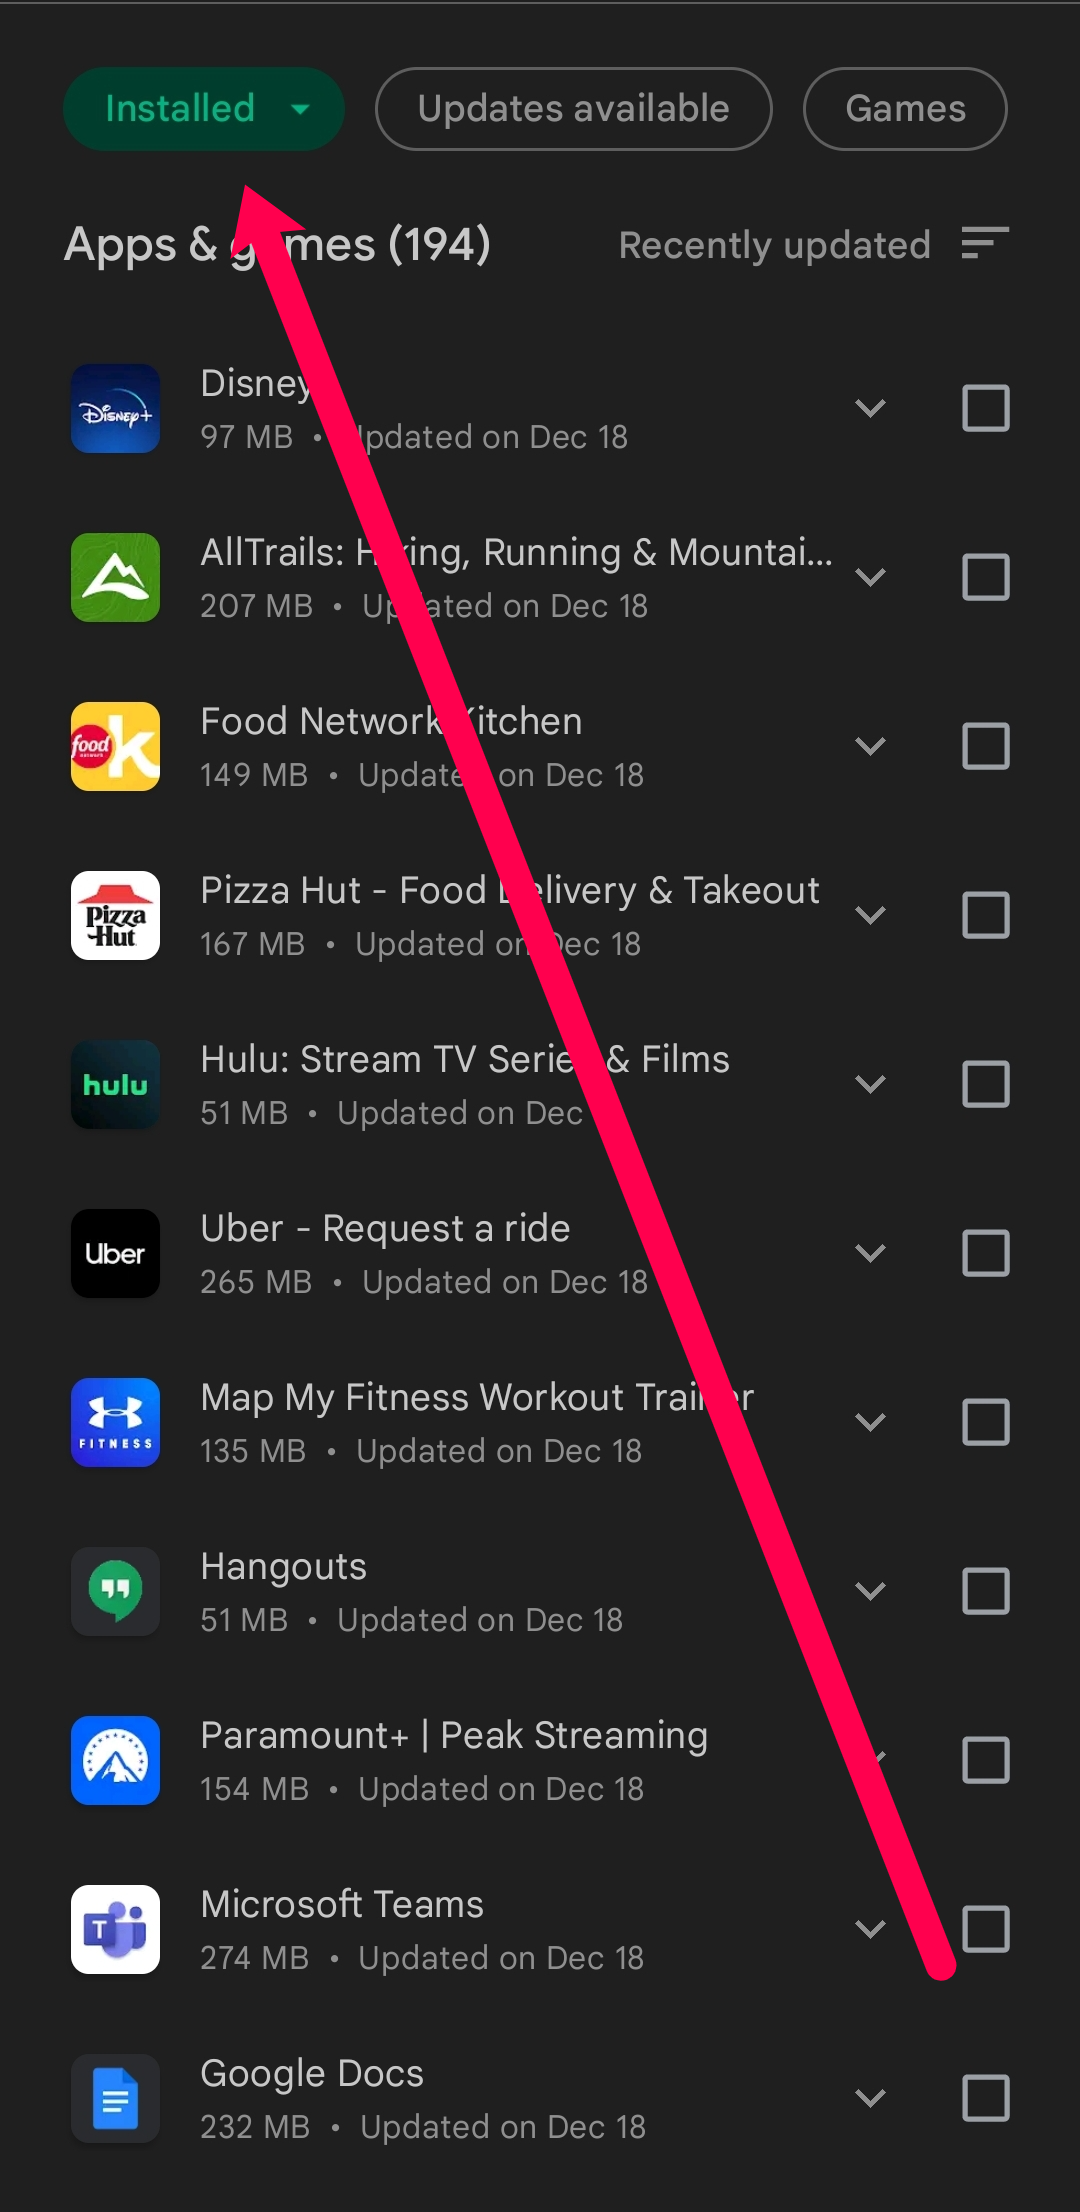 How do I find previously uninstalled apps?